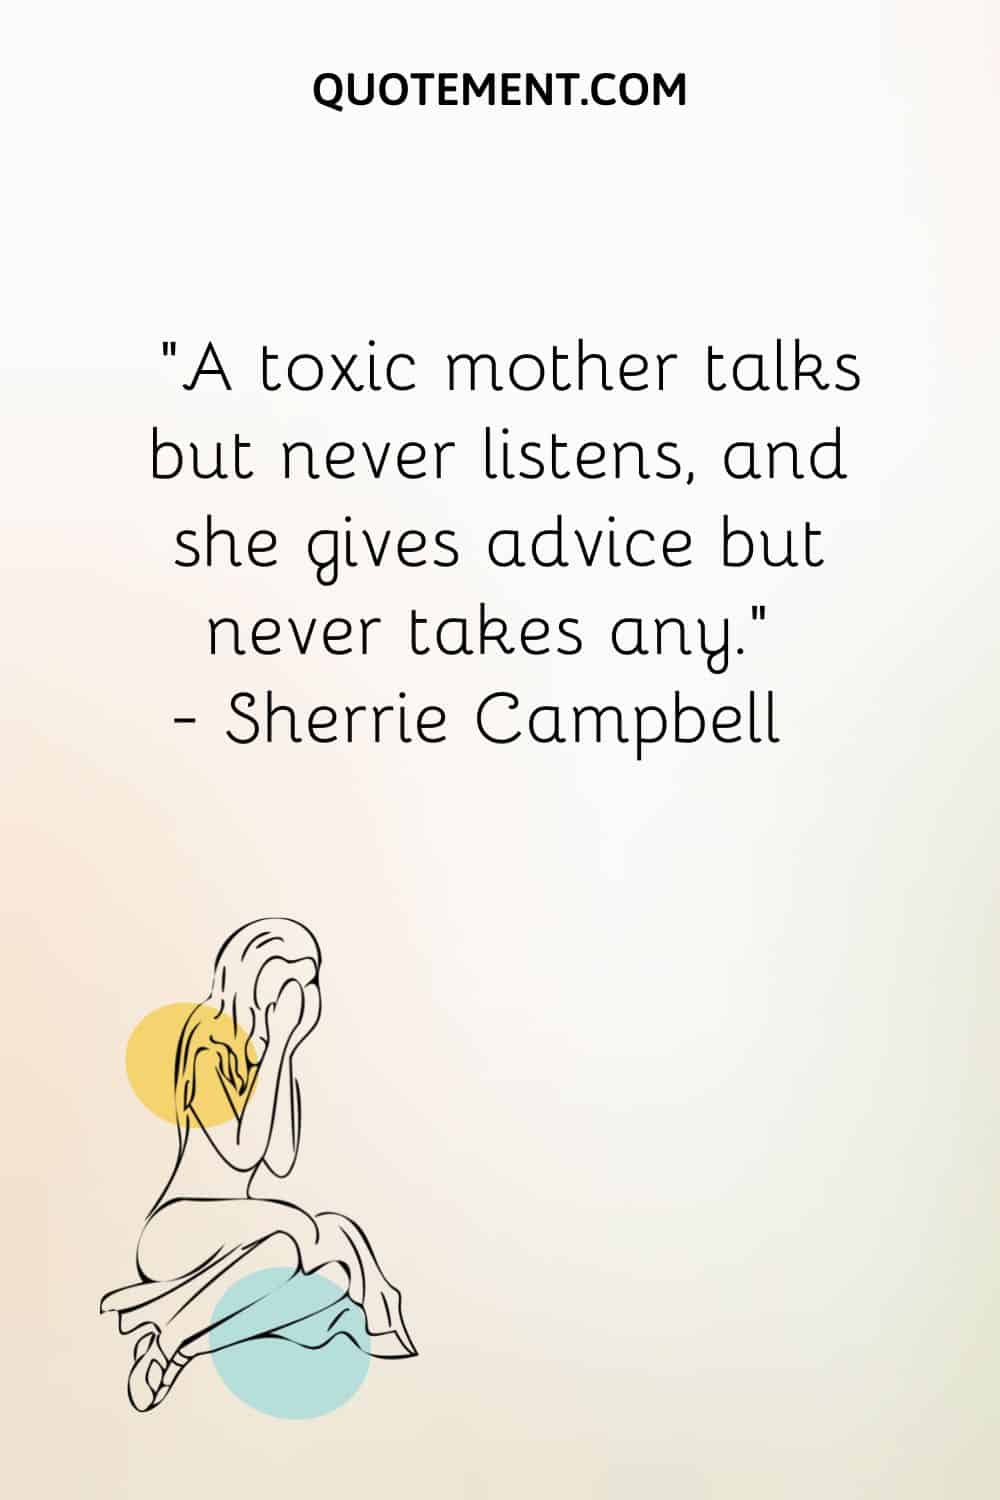 A toxic mother talks but never listens